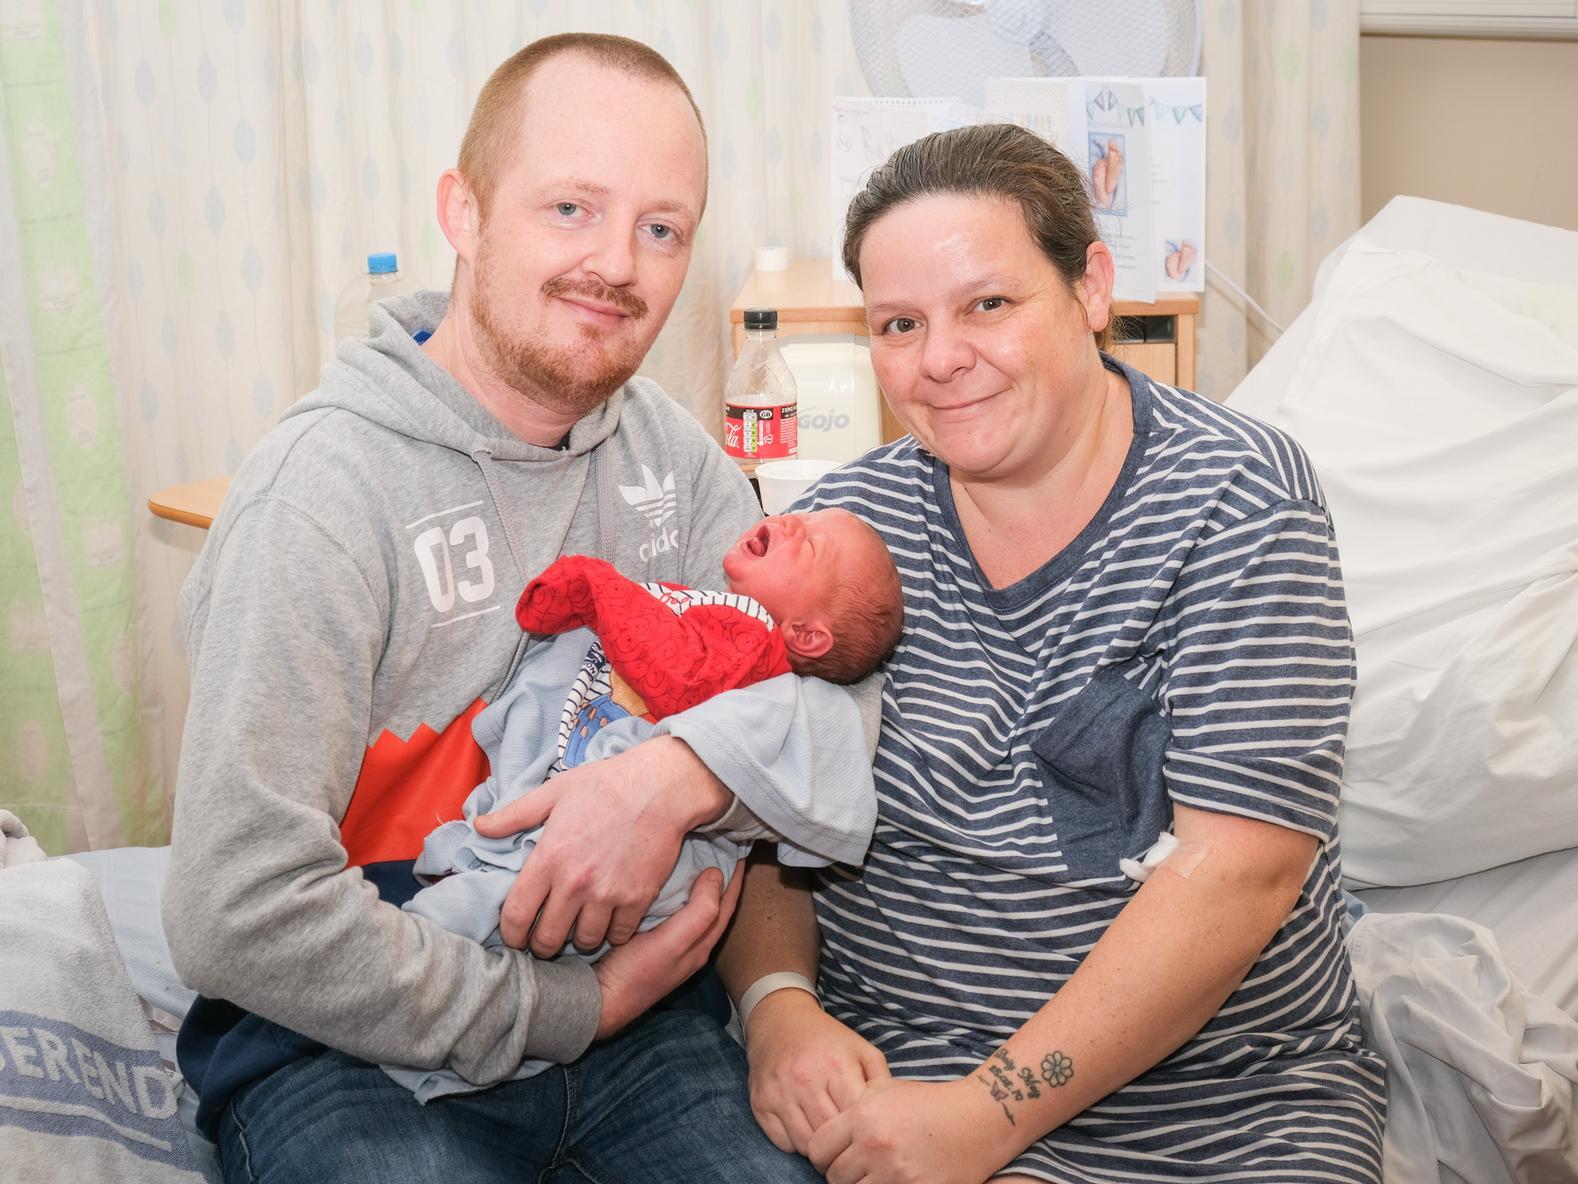 Paul John Douglas McAiney was born at Royal Preston Hospital on November 14 at 9.53am, weighing 7lb 13oz to Paul McAiney and Donna OMelia